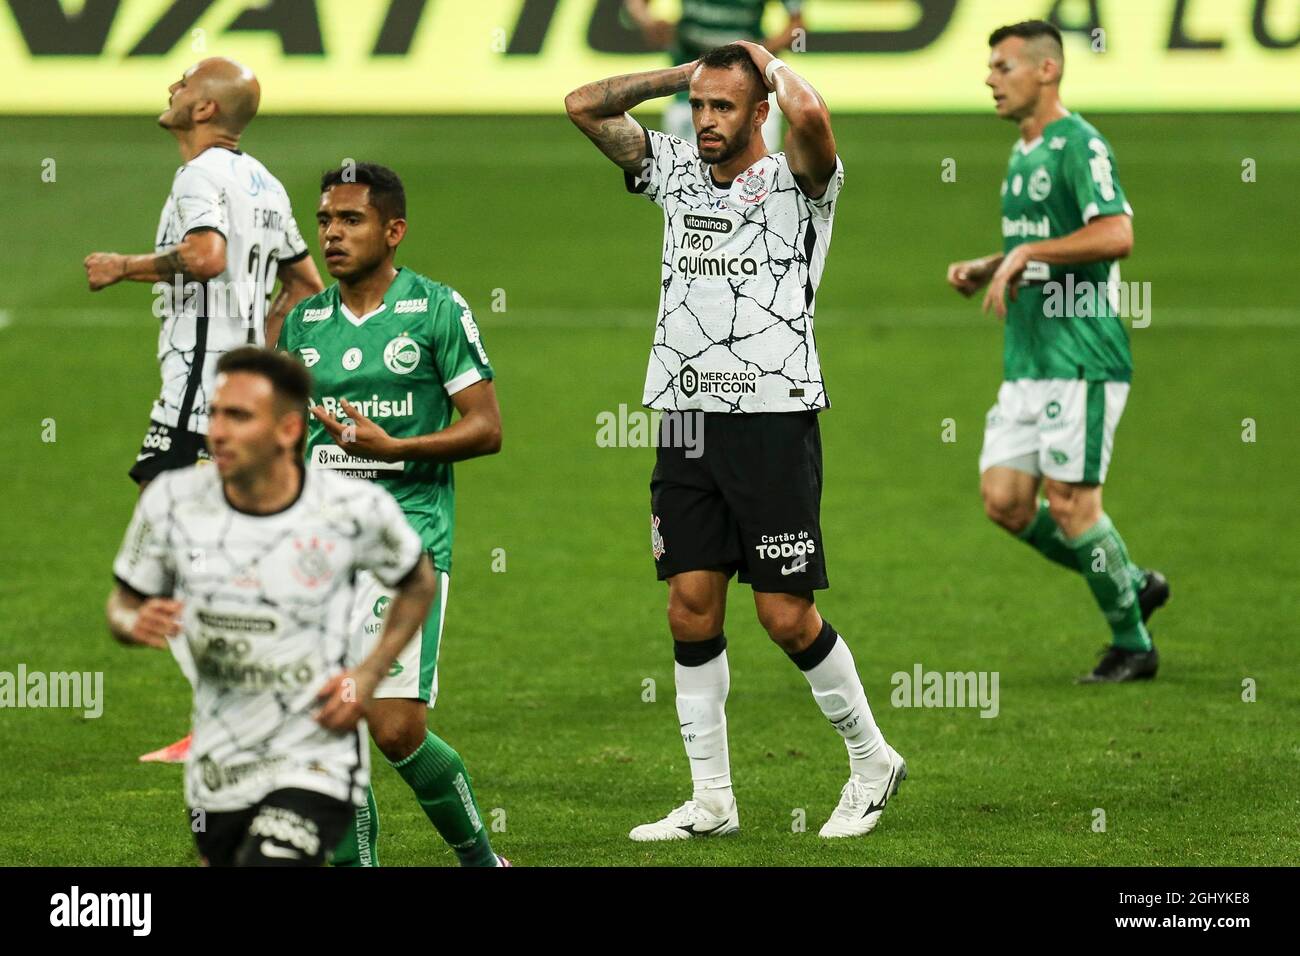 SÃO PAULO, SP - 07.09.2021: CORINTHIANS X JUVENTUDE - Renato Augusto during the game between Corinthians and Youth held at Neo Química Arena in São Paulo, SP. The match is valid for the 19th round of the Brasileirão 2021. (Photo: Marco Galvão/Fotoarena) Stock Photo